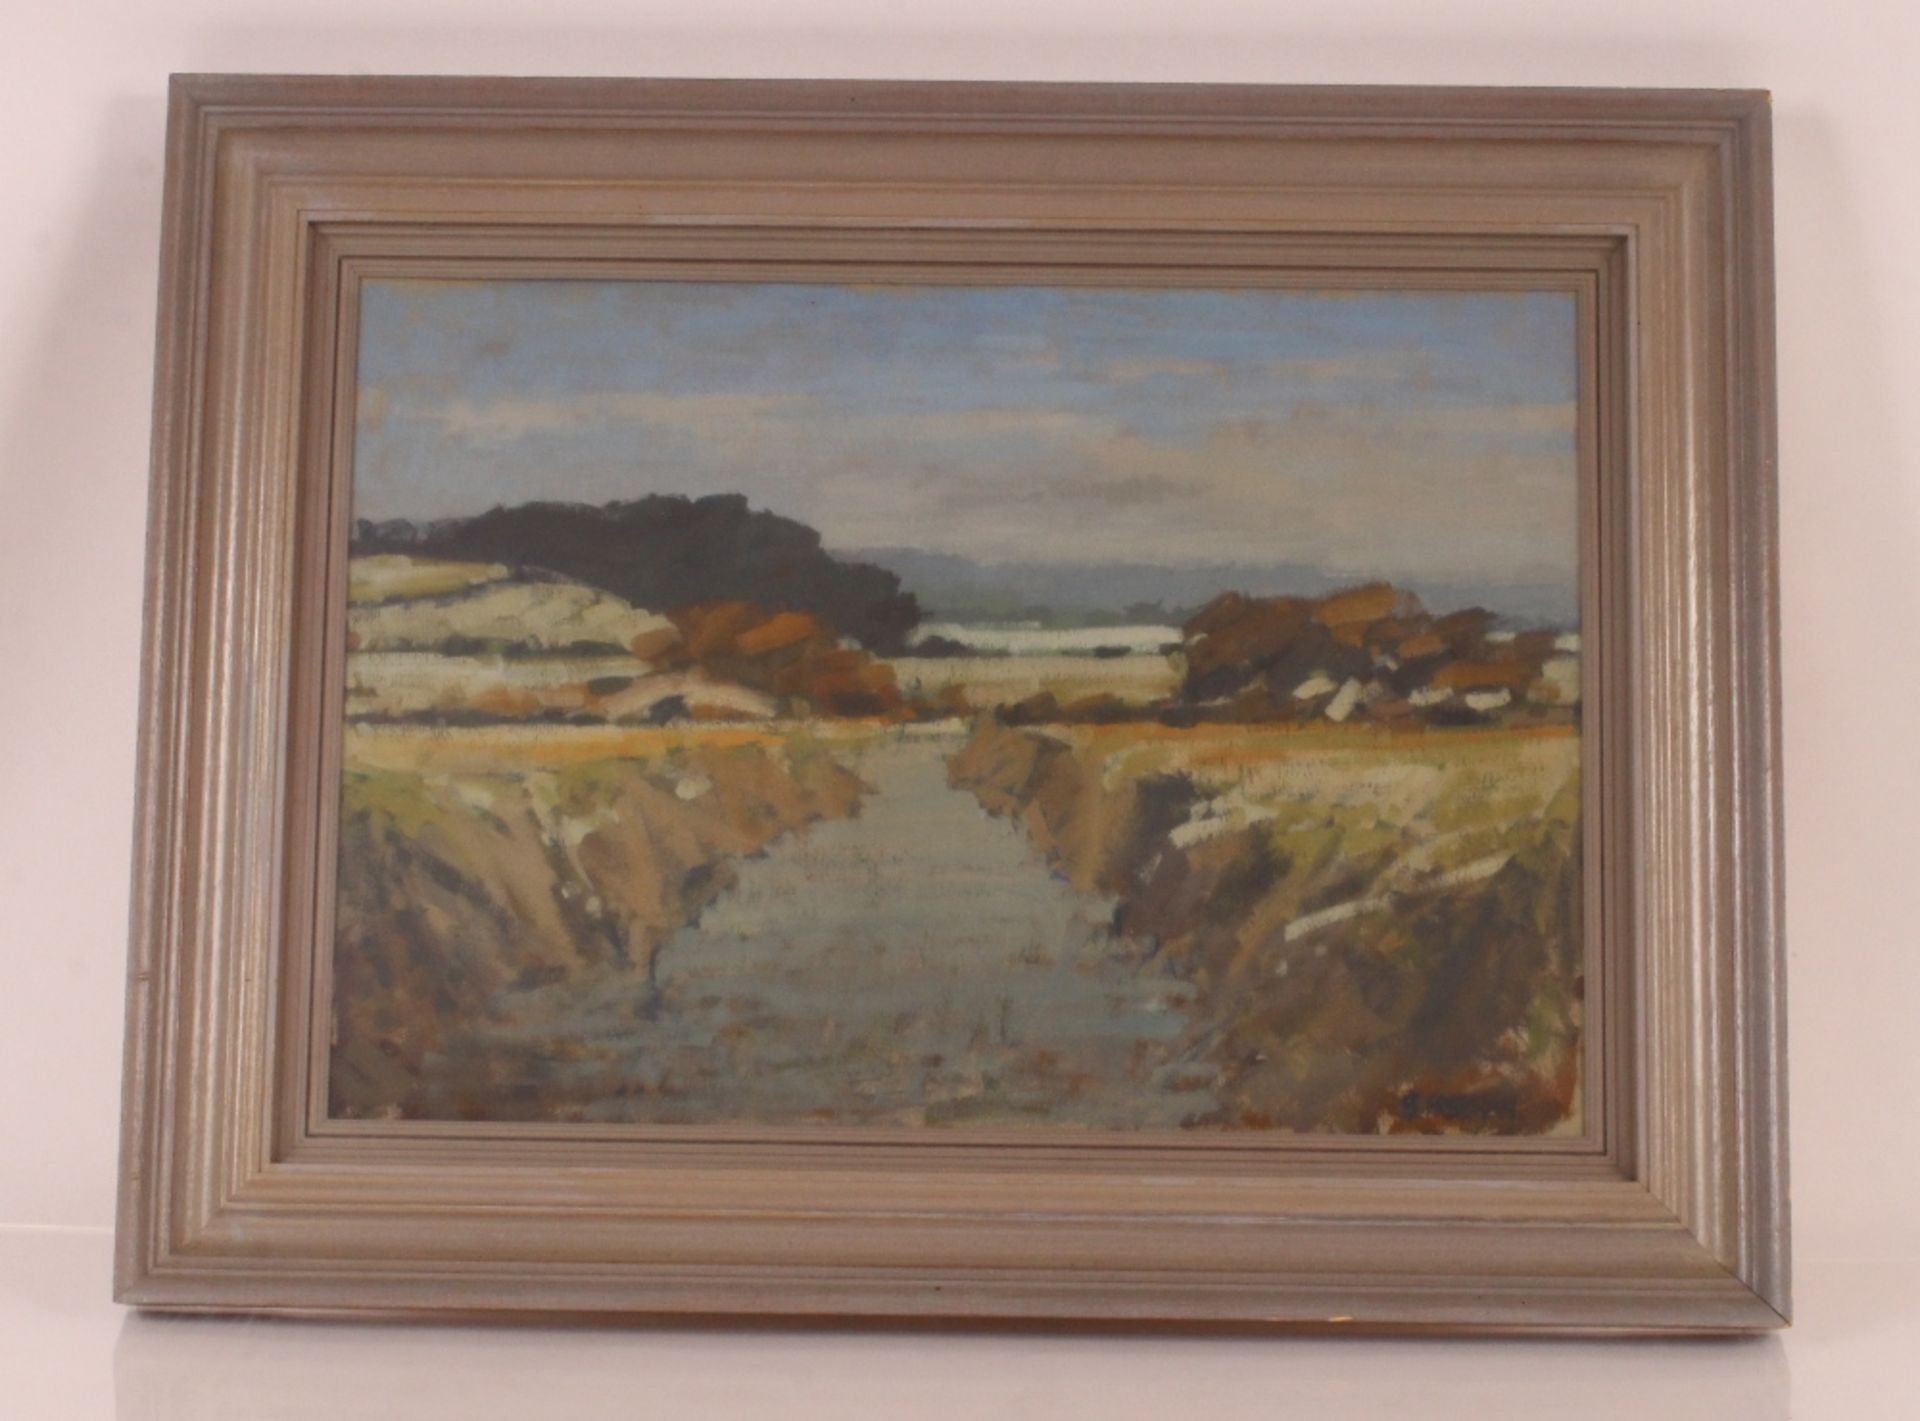 Barry Freeman, "December Rother Levels", oil sign - Image 2 of 2